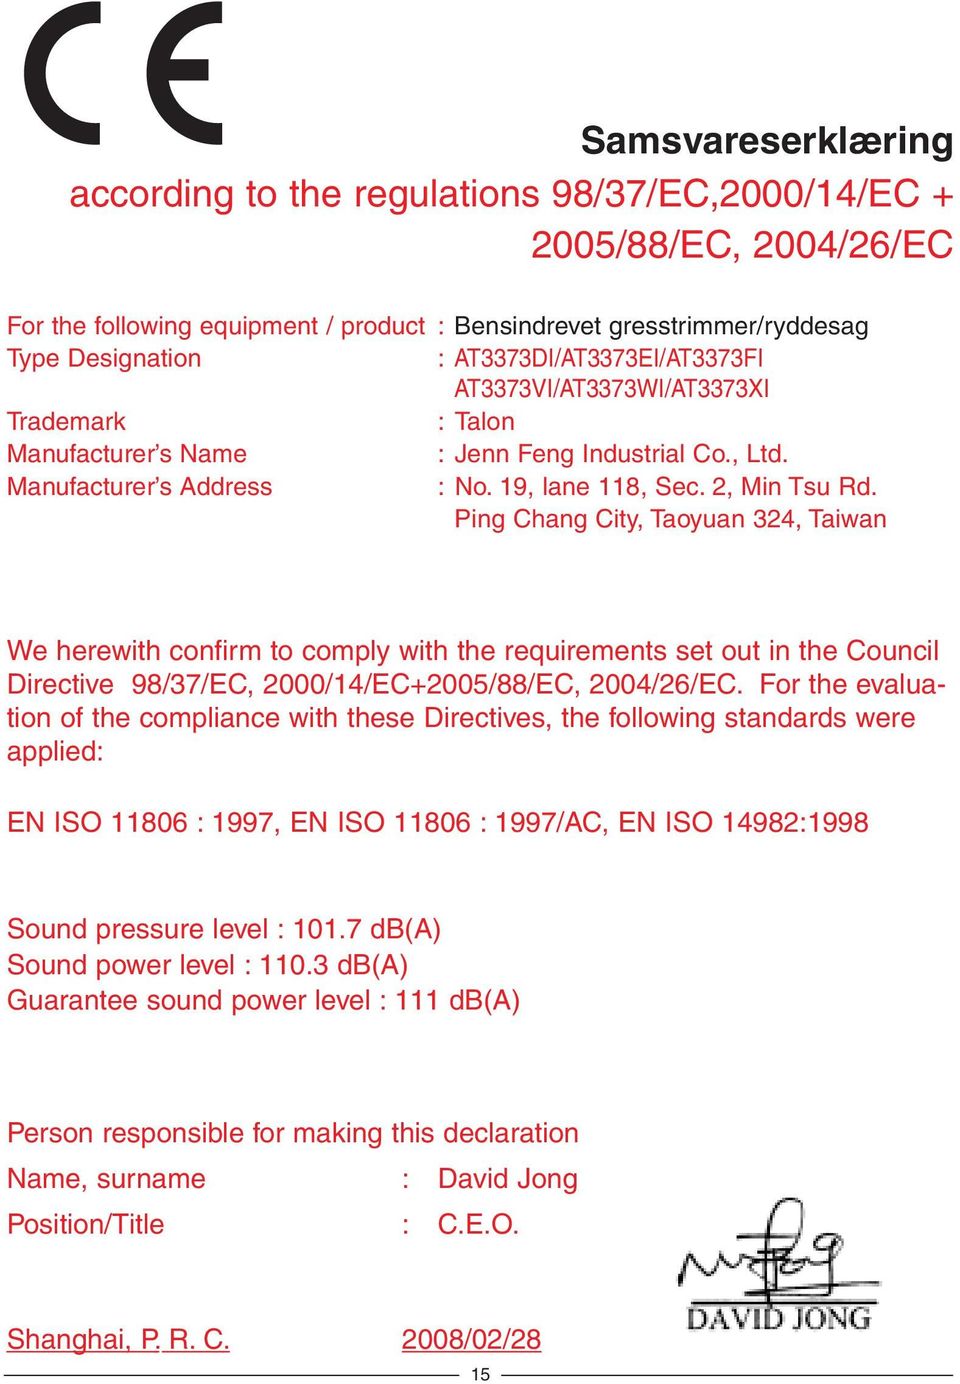 Ping hang ity, Taoyuan 324, Taiwan We herewith confirm to comply with the requirements set out in the ouncil irective 98/37/, 2000/14/+2005/88/, 2004/26/.